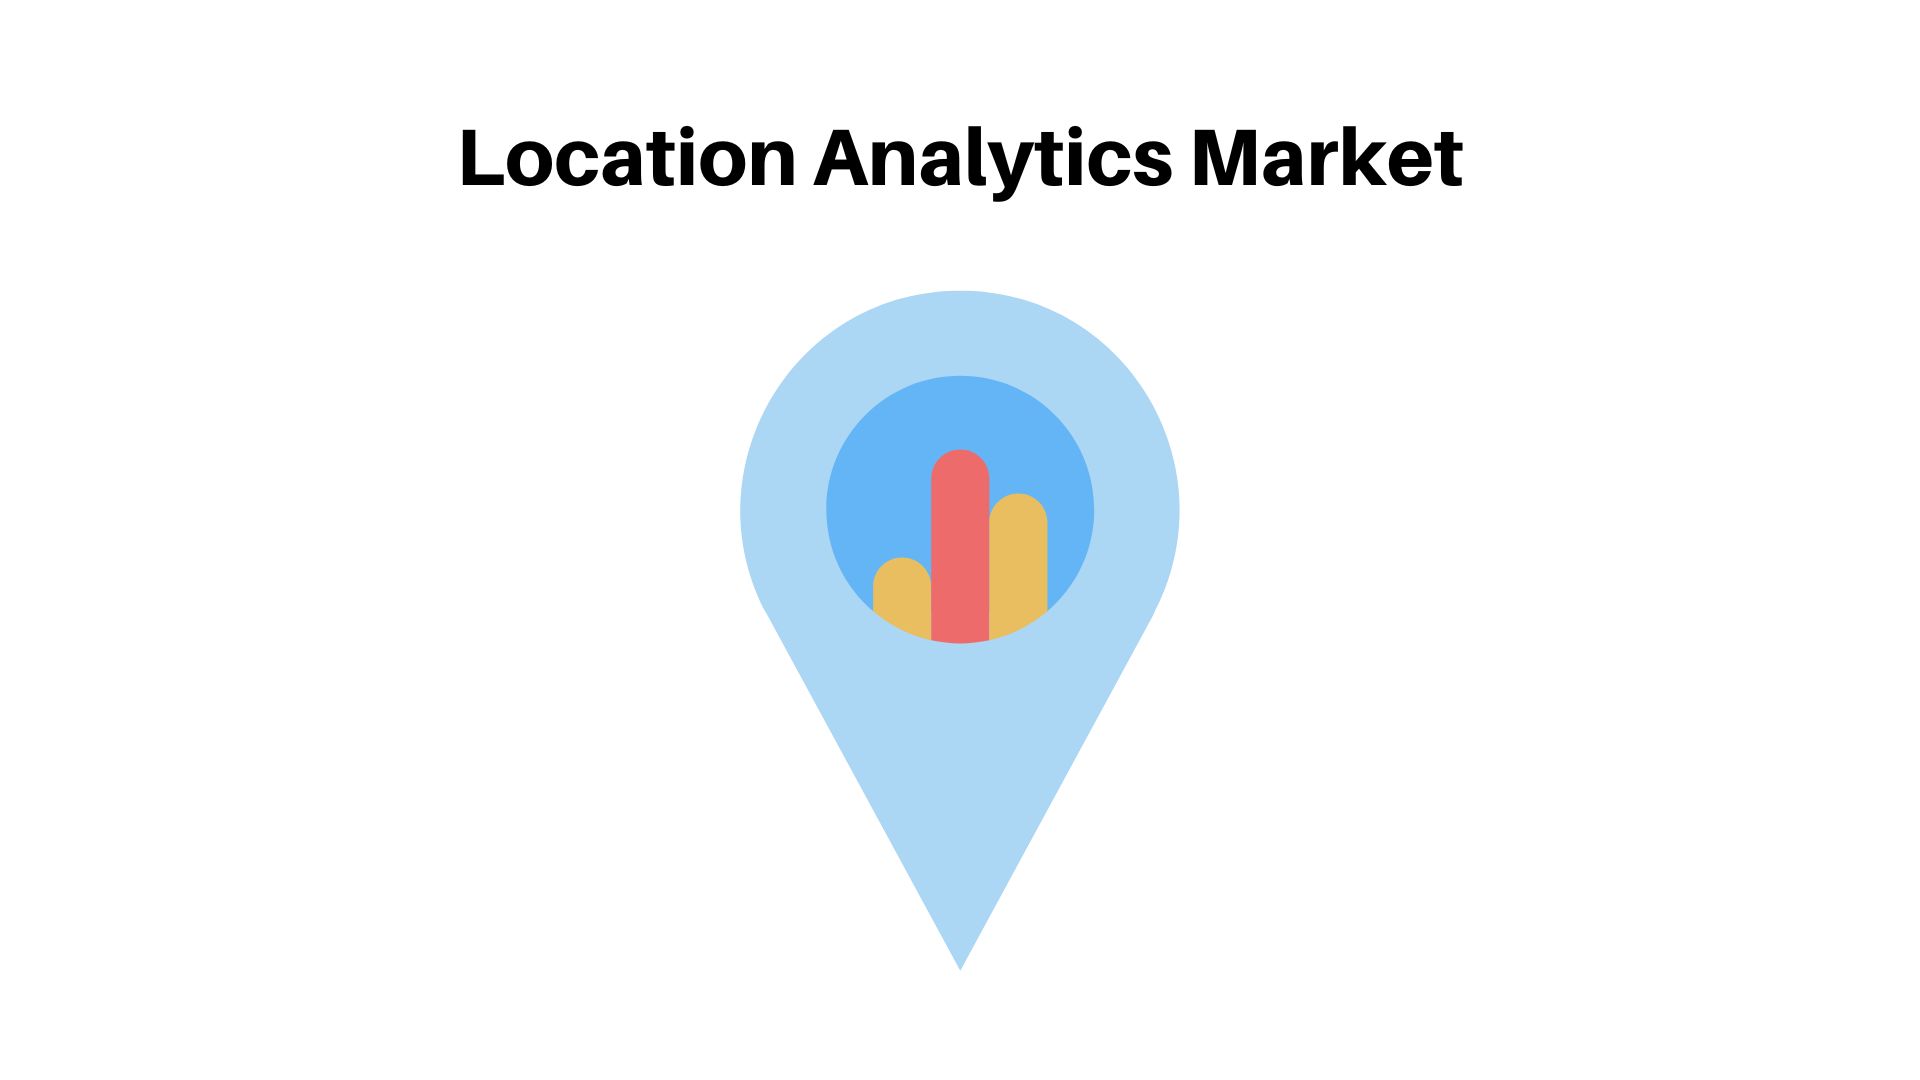 Location Analytics Market is poised to grow at a CAGR of 13.1% by 2032